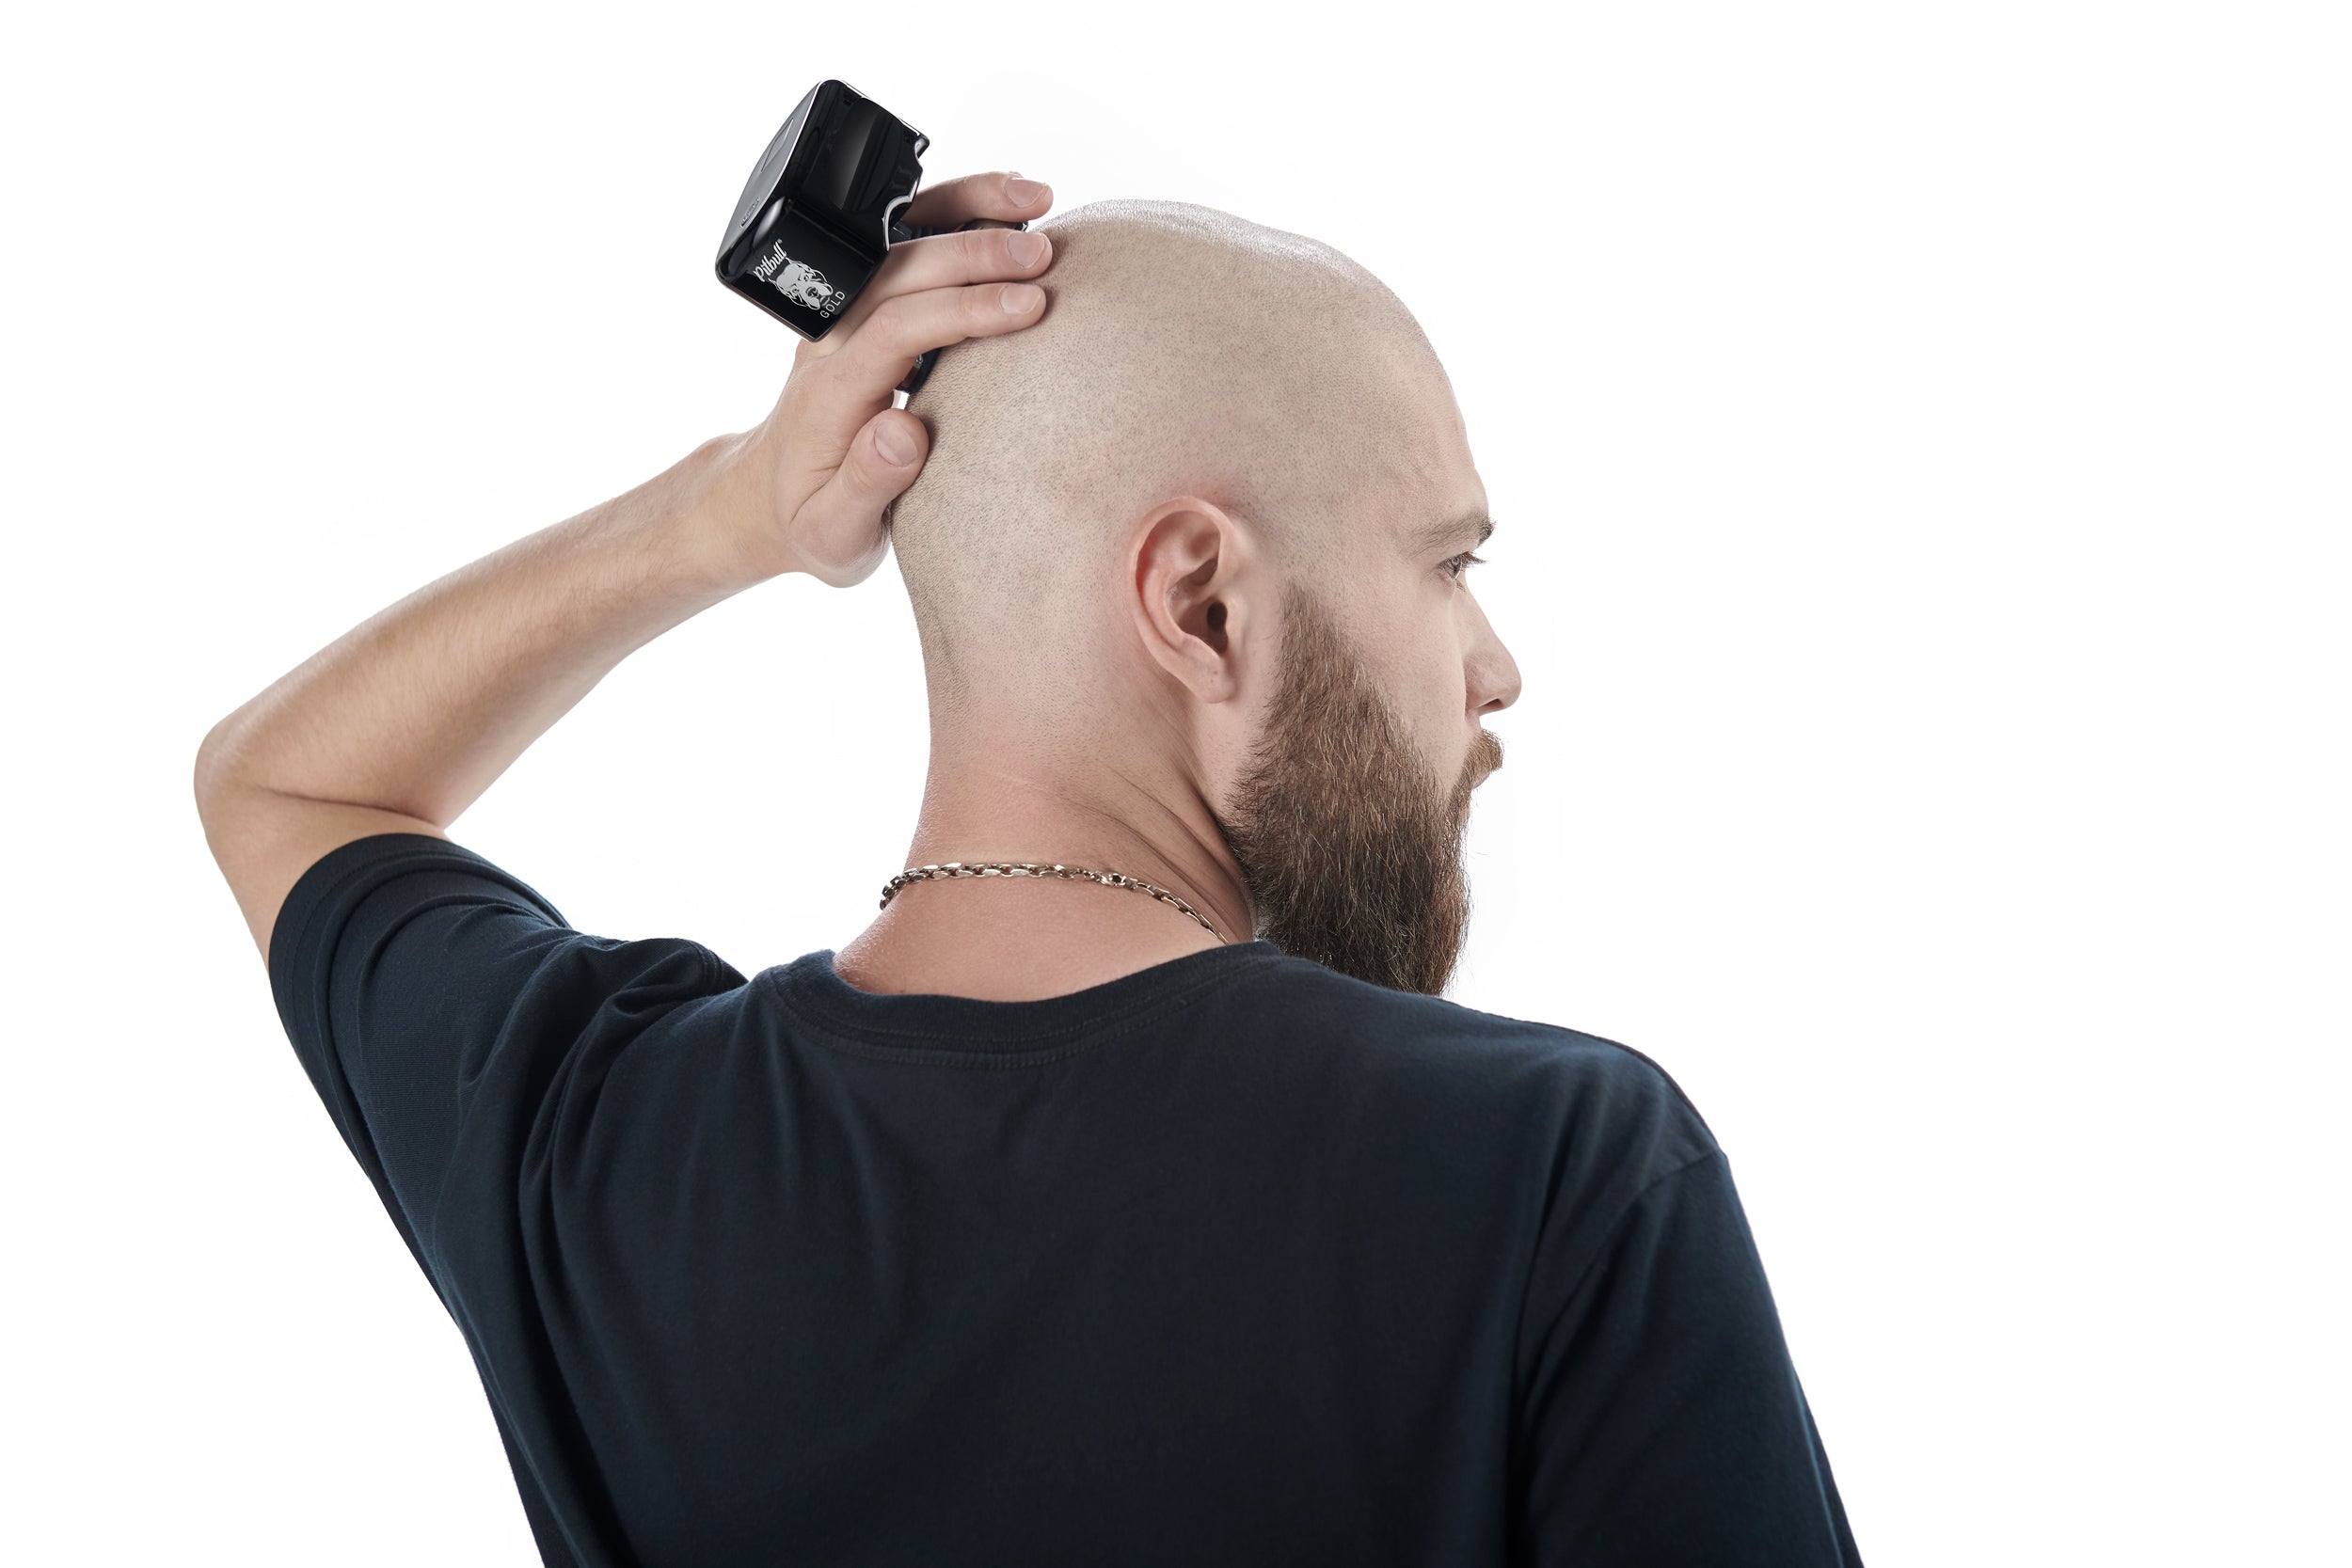 best clippers for bald head uk